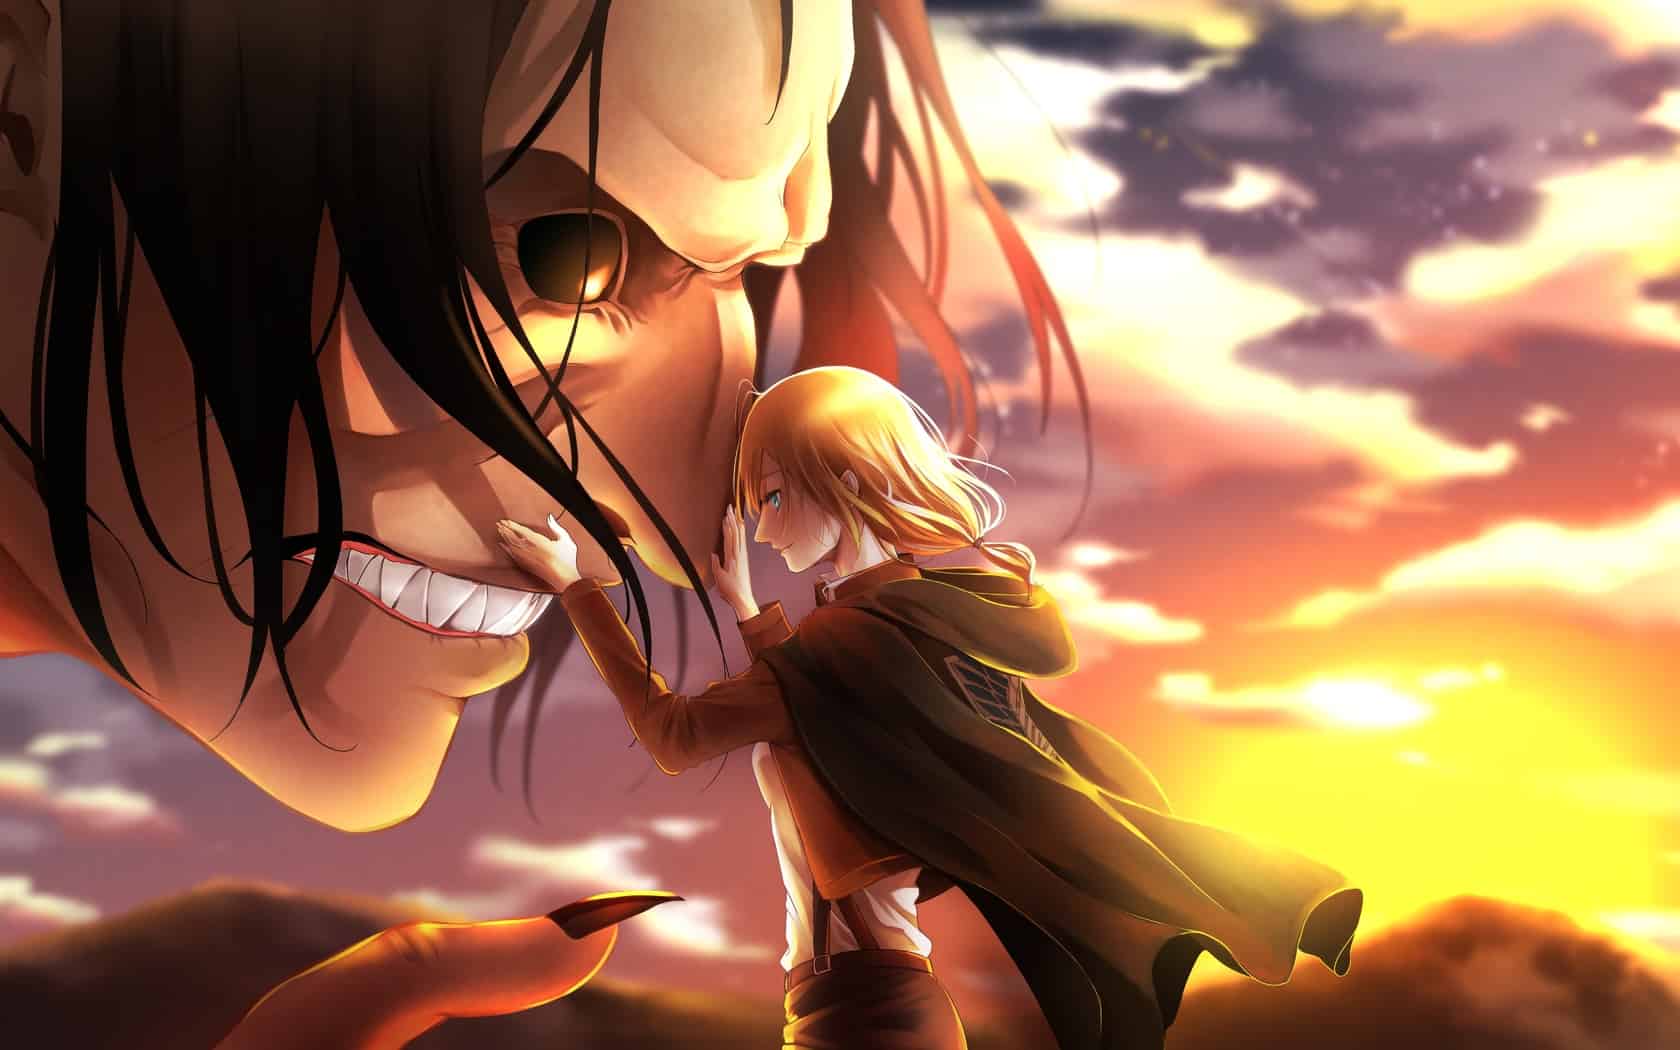 Attack On Titan is back